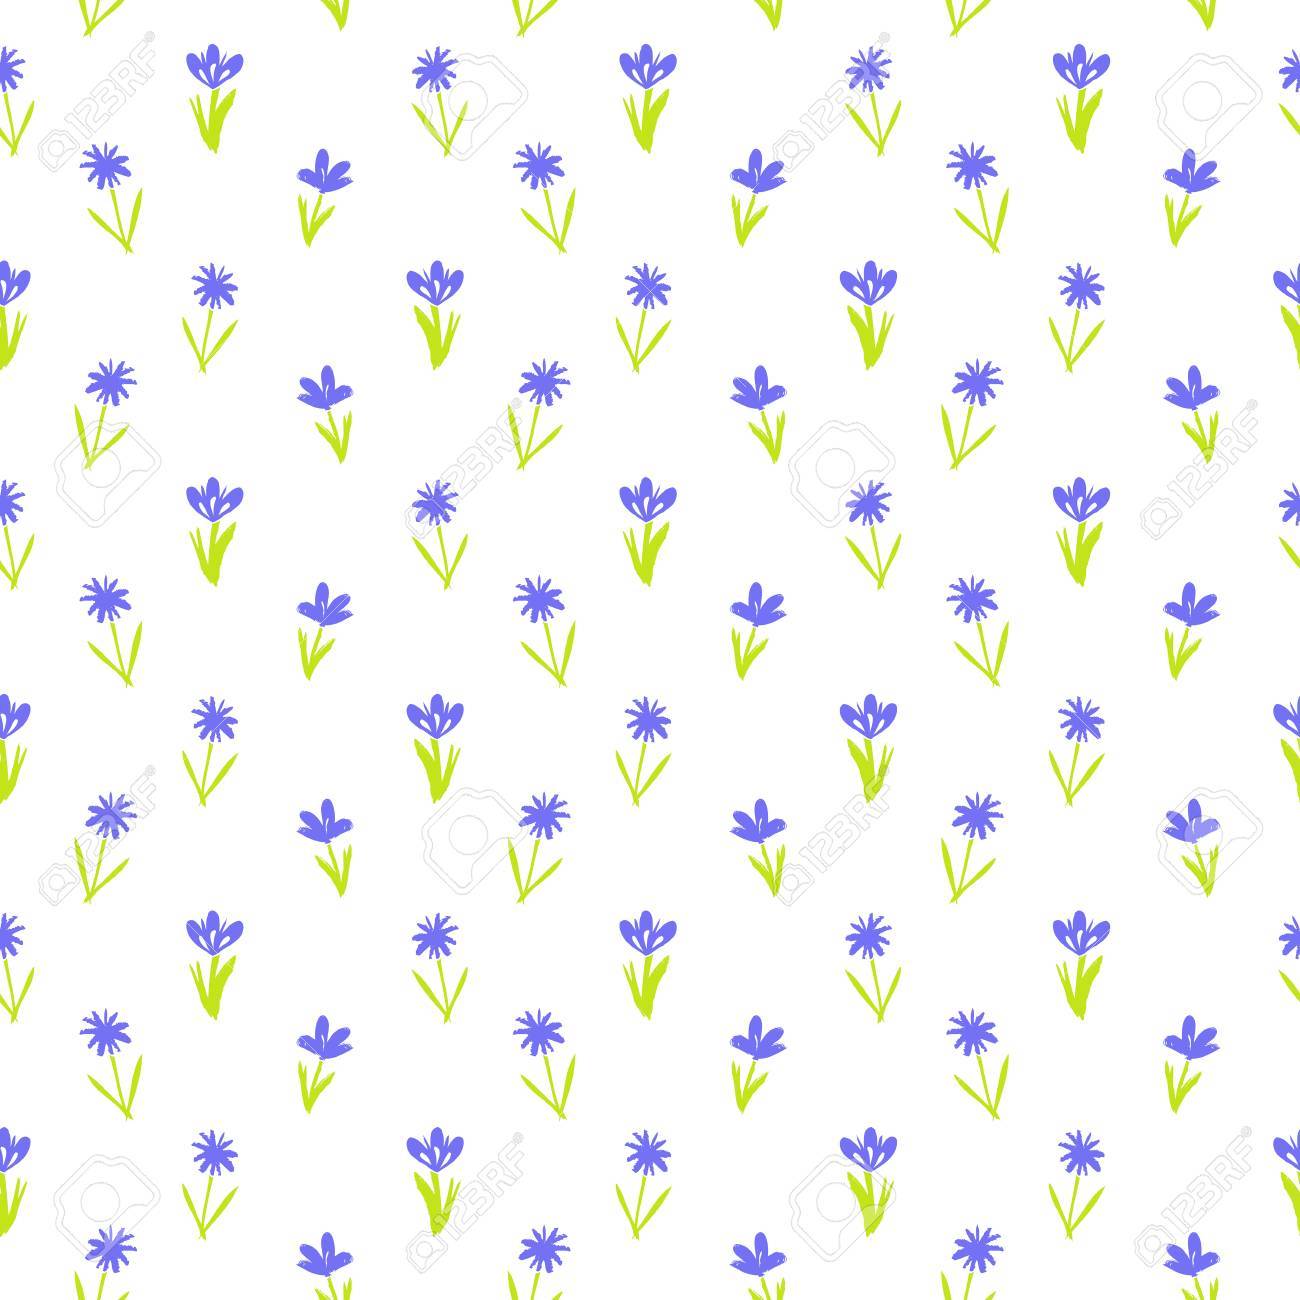 Ditsy Spring Floral Pattern With Small Hand Drawn Violet Flowers